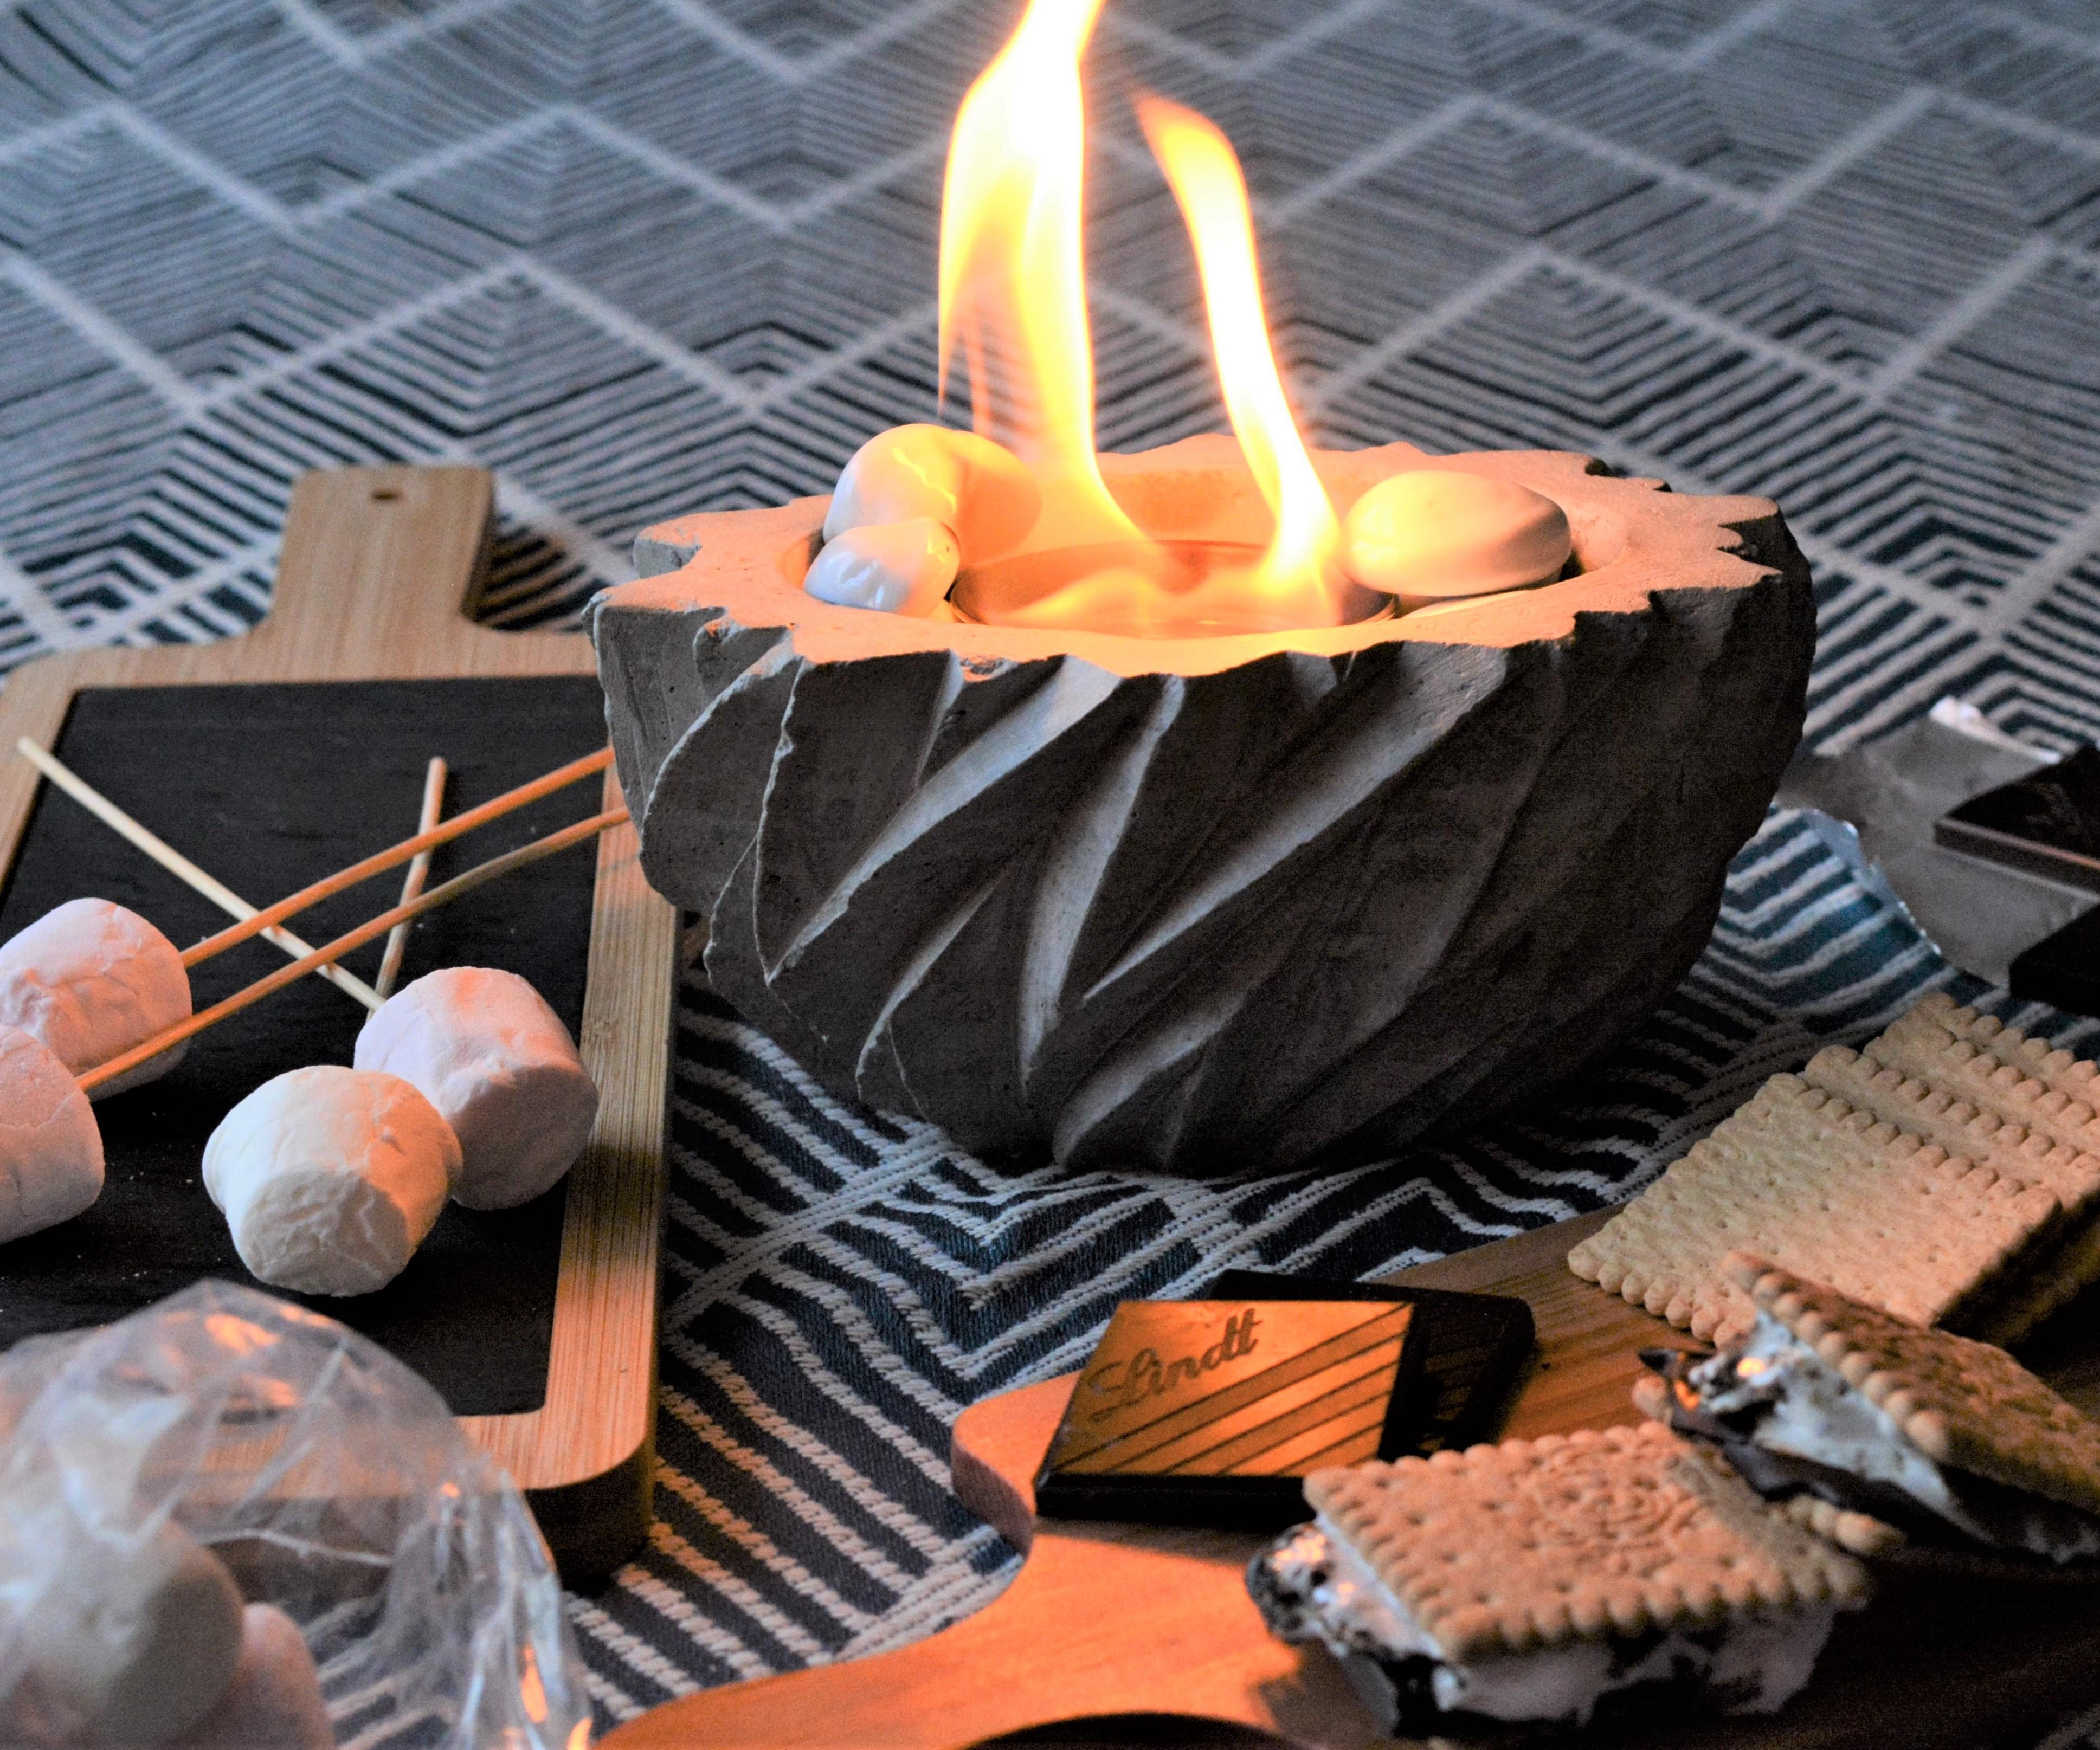 Mini Indoor Fire Pit for S'mores 